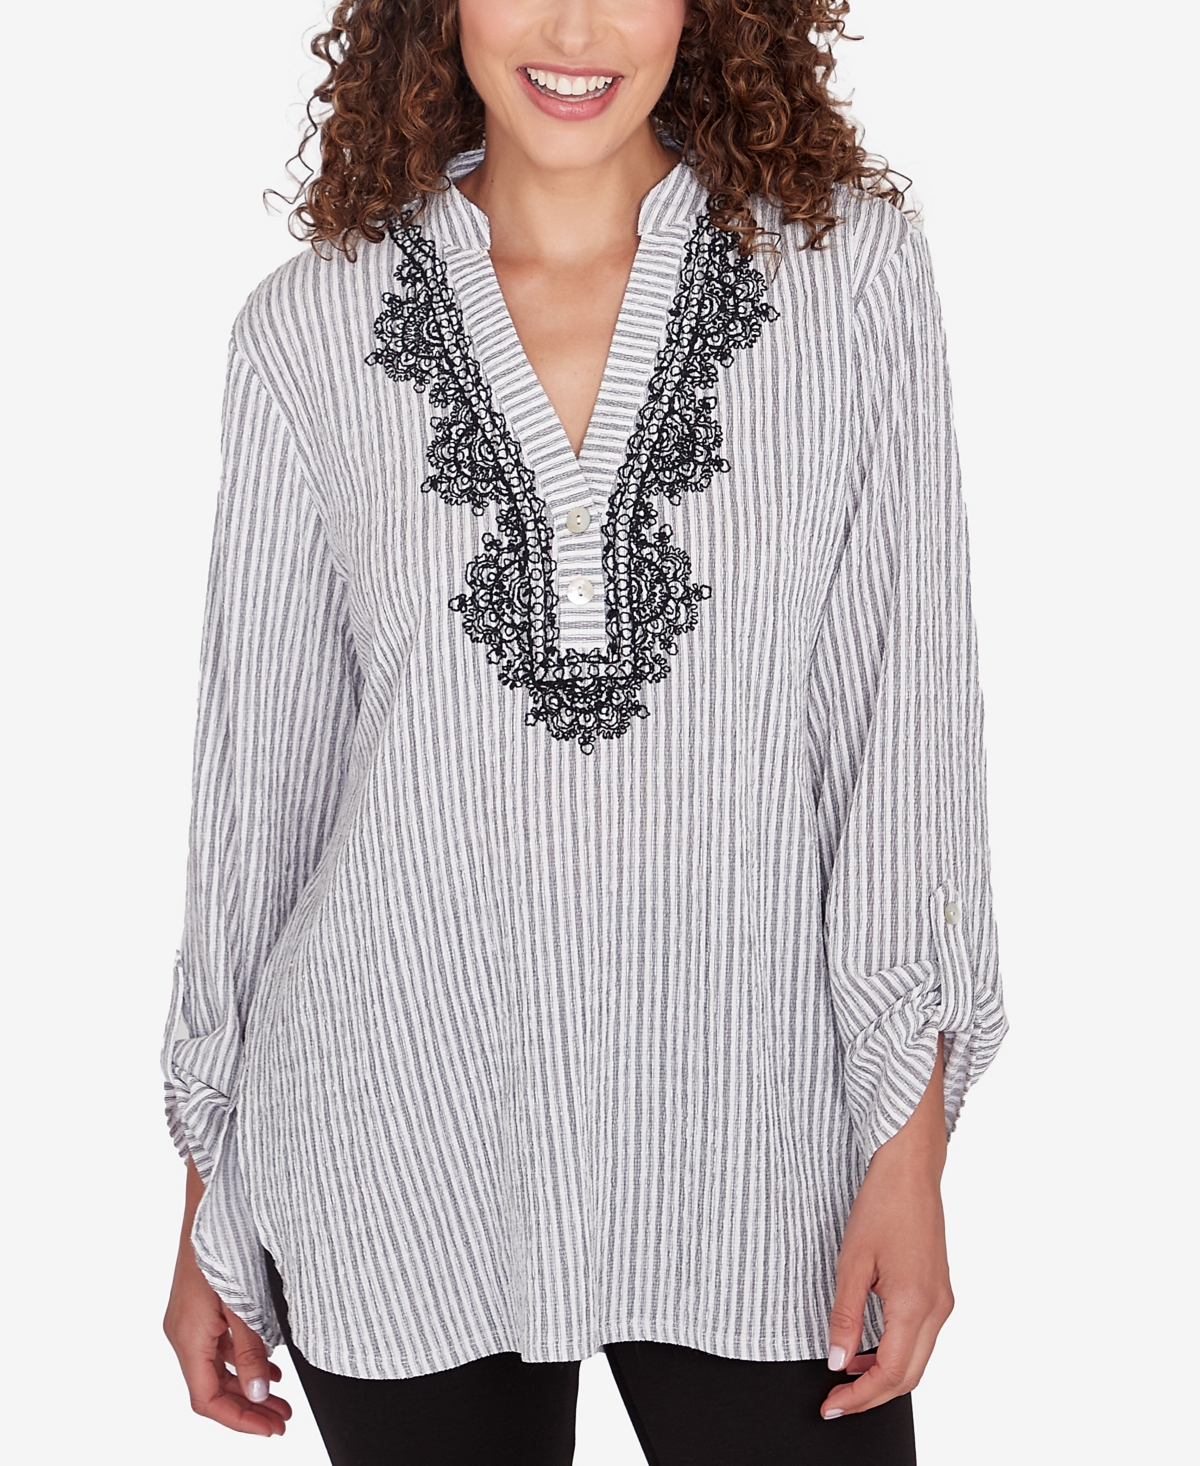 Ruby Rd. Petite Split Neck Embroidered Puckered Stripe Top In Black Multi